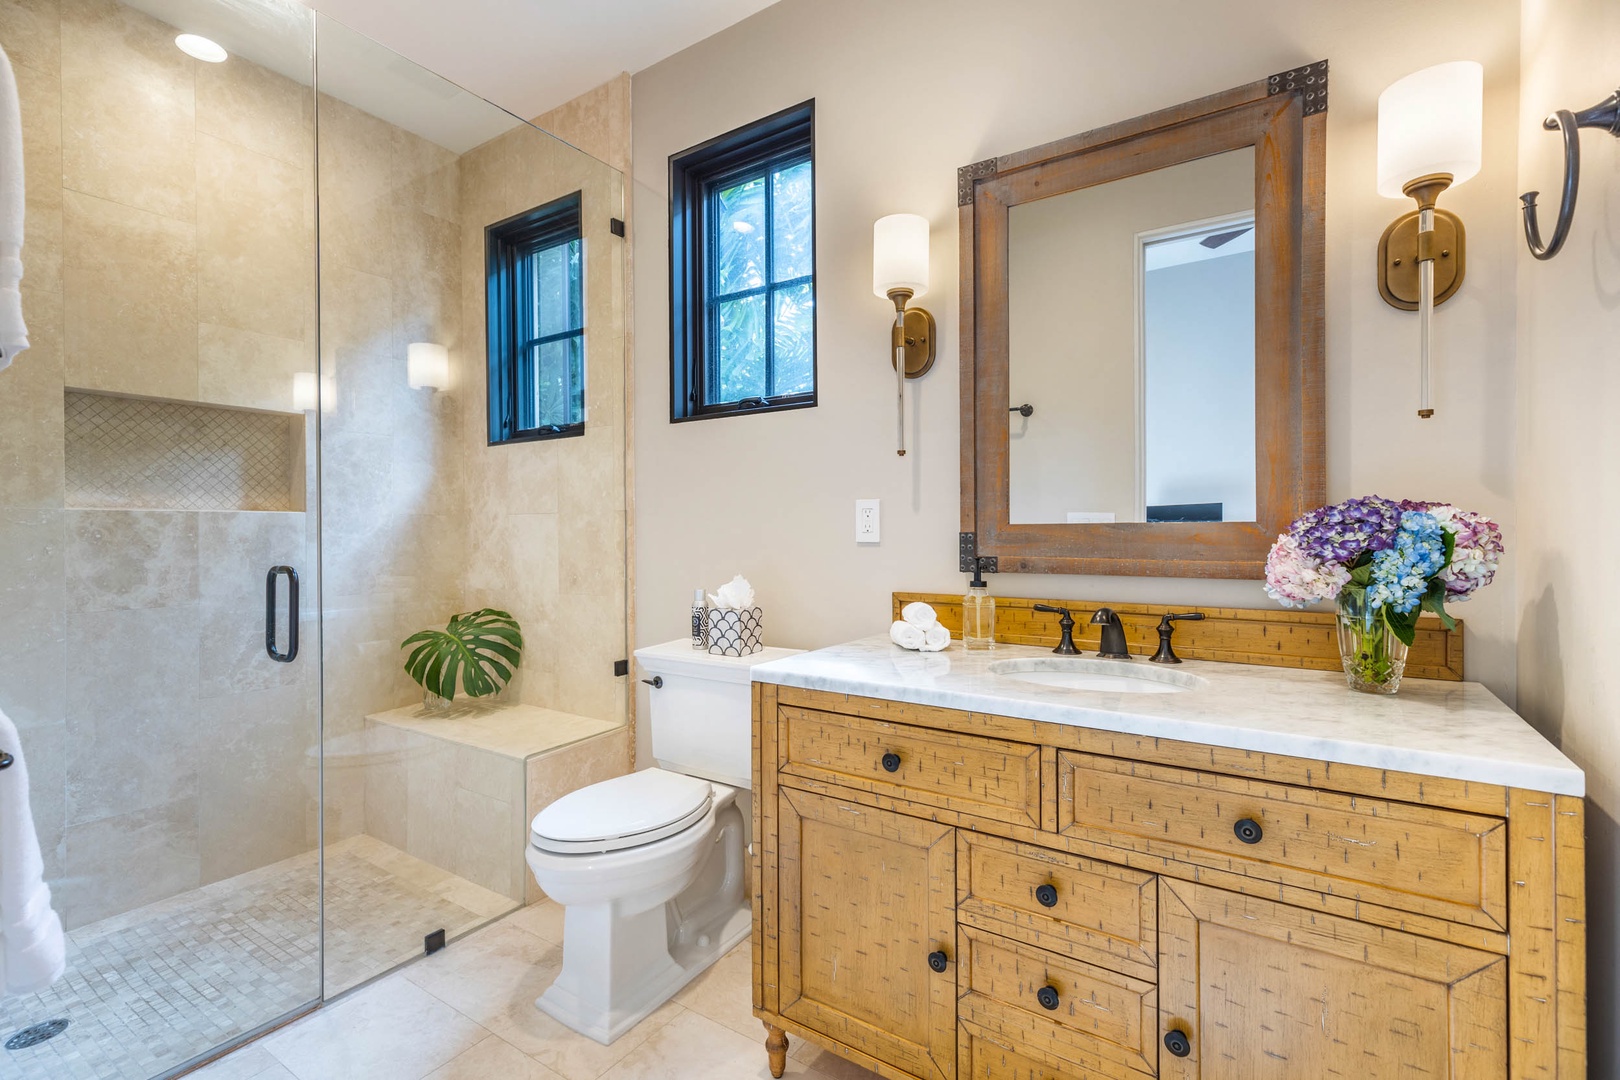 Honolulu Vacation Rentals, The Kahala Mansion - Ensuite bath with a walk-in shower in a glass enclosure.